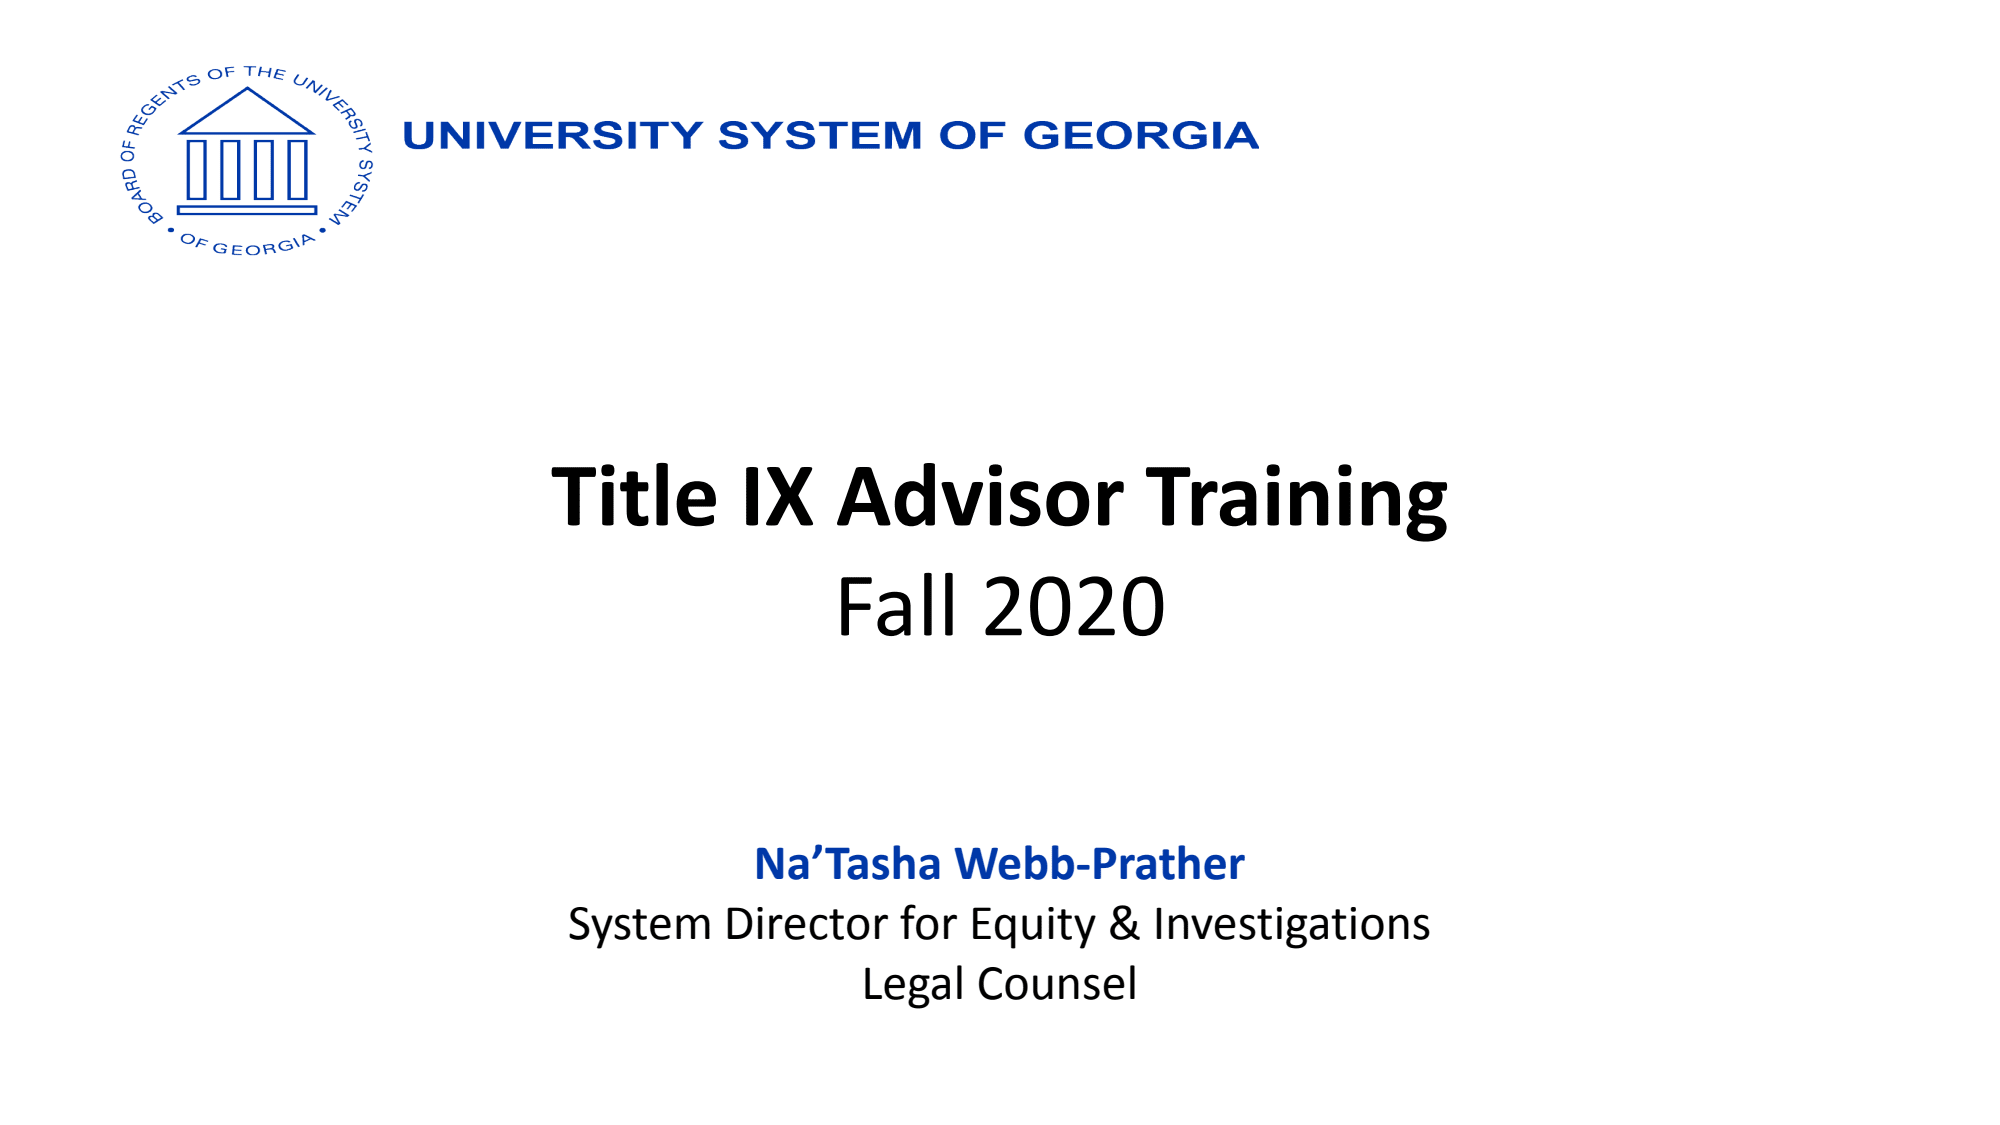 First page of the PDF file: TitleIXAdvisorTraining